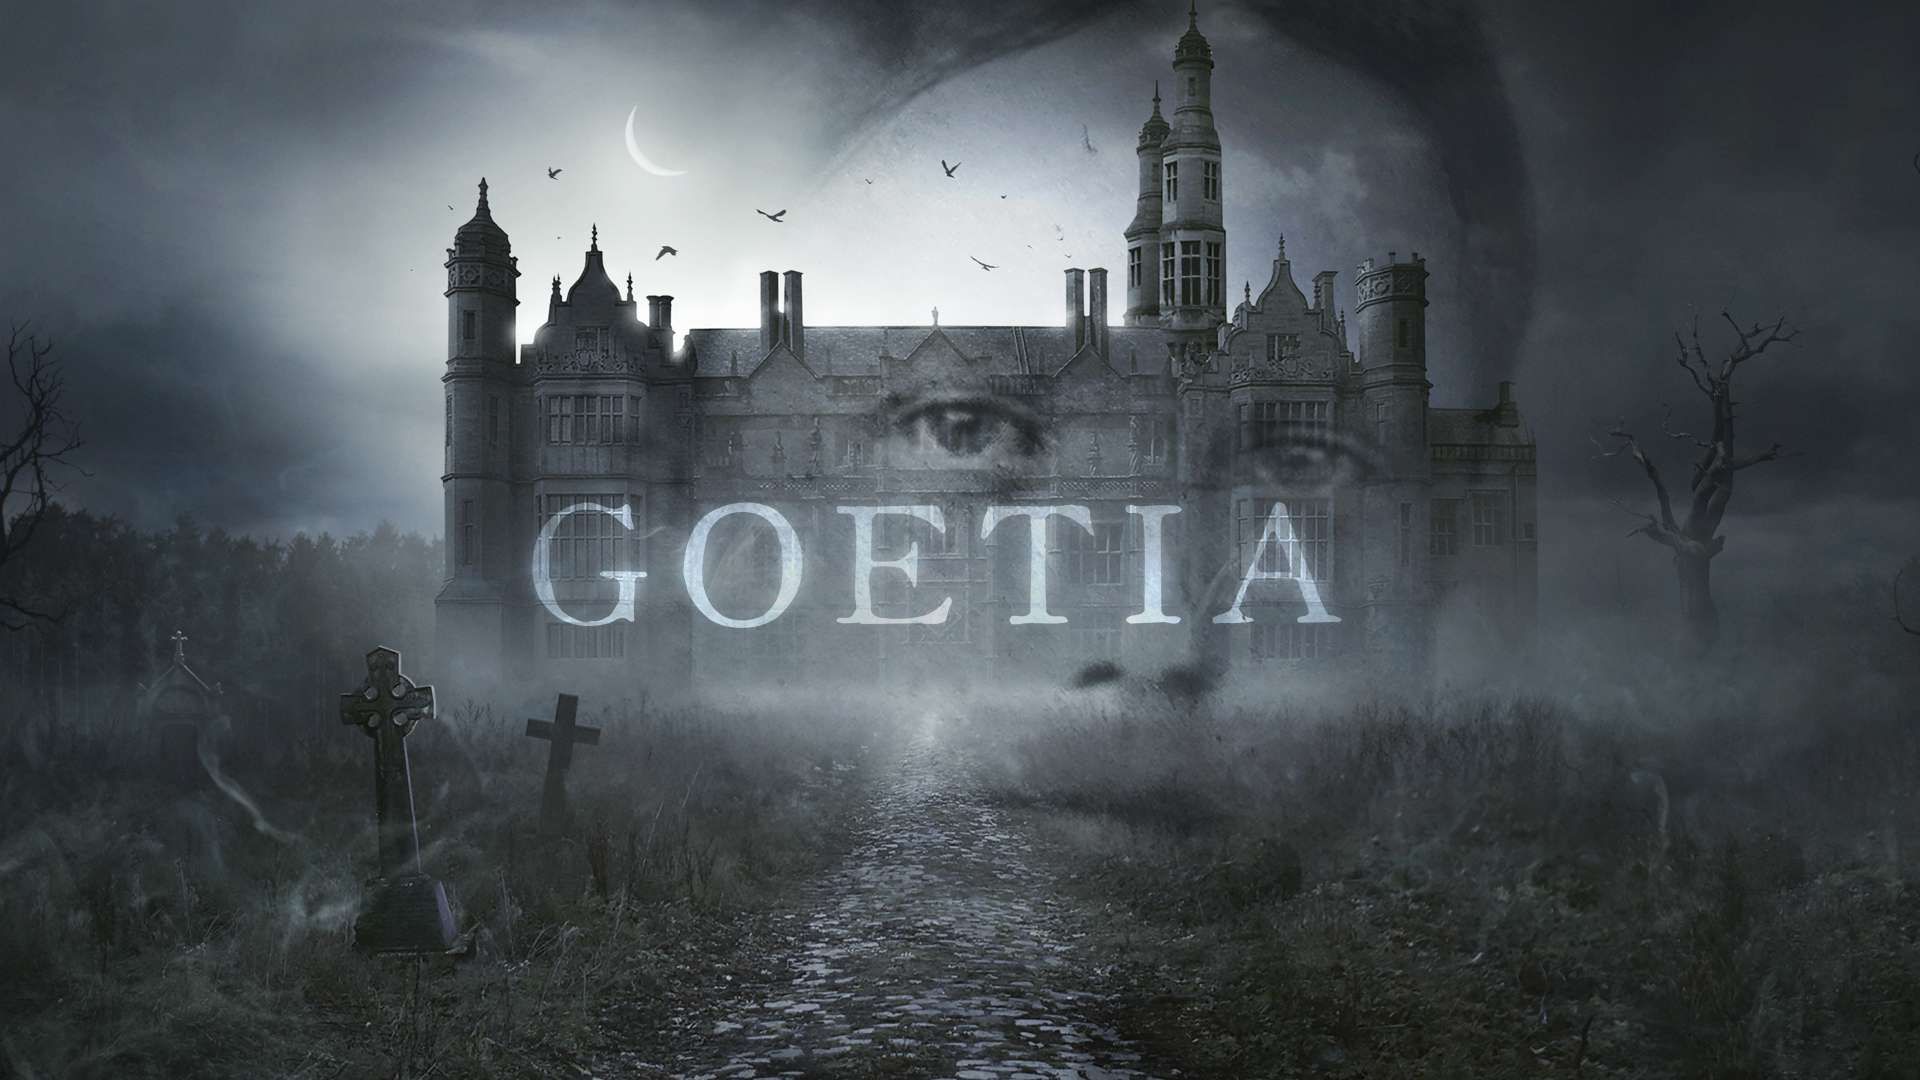 Goetia Display Art with a hazy image of a child and castle on the background